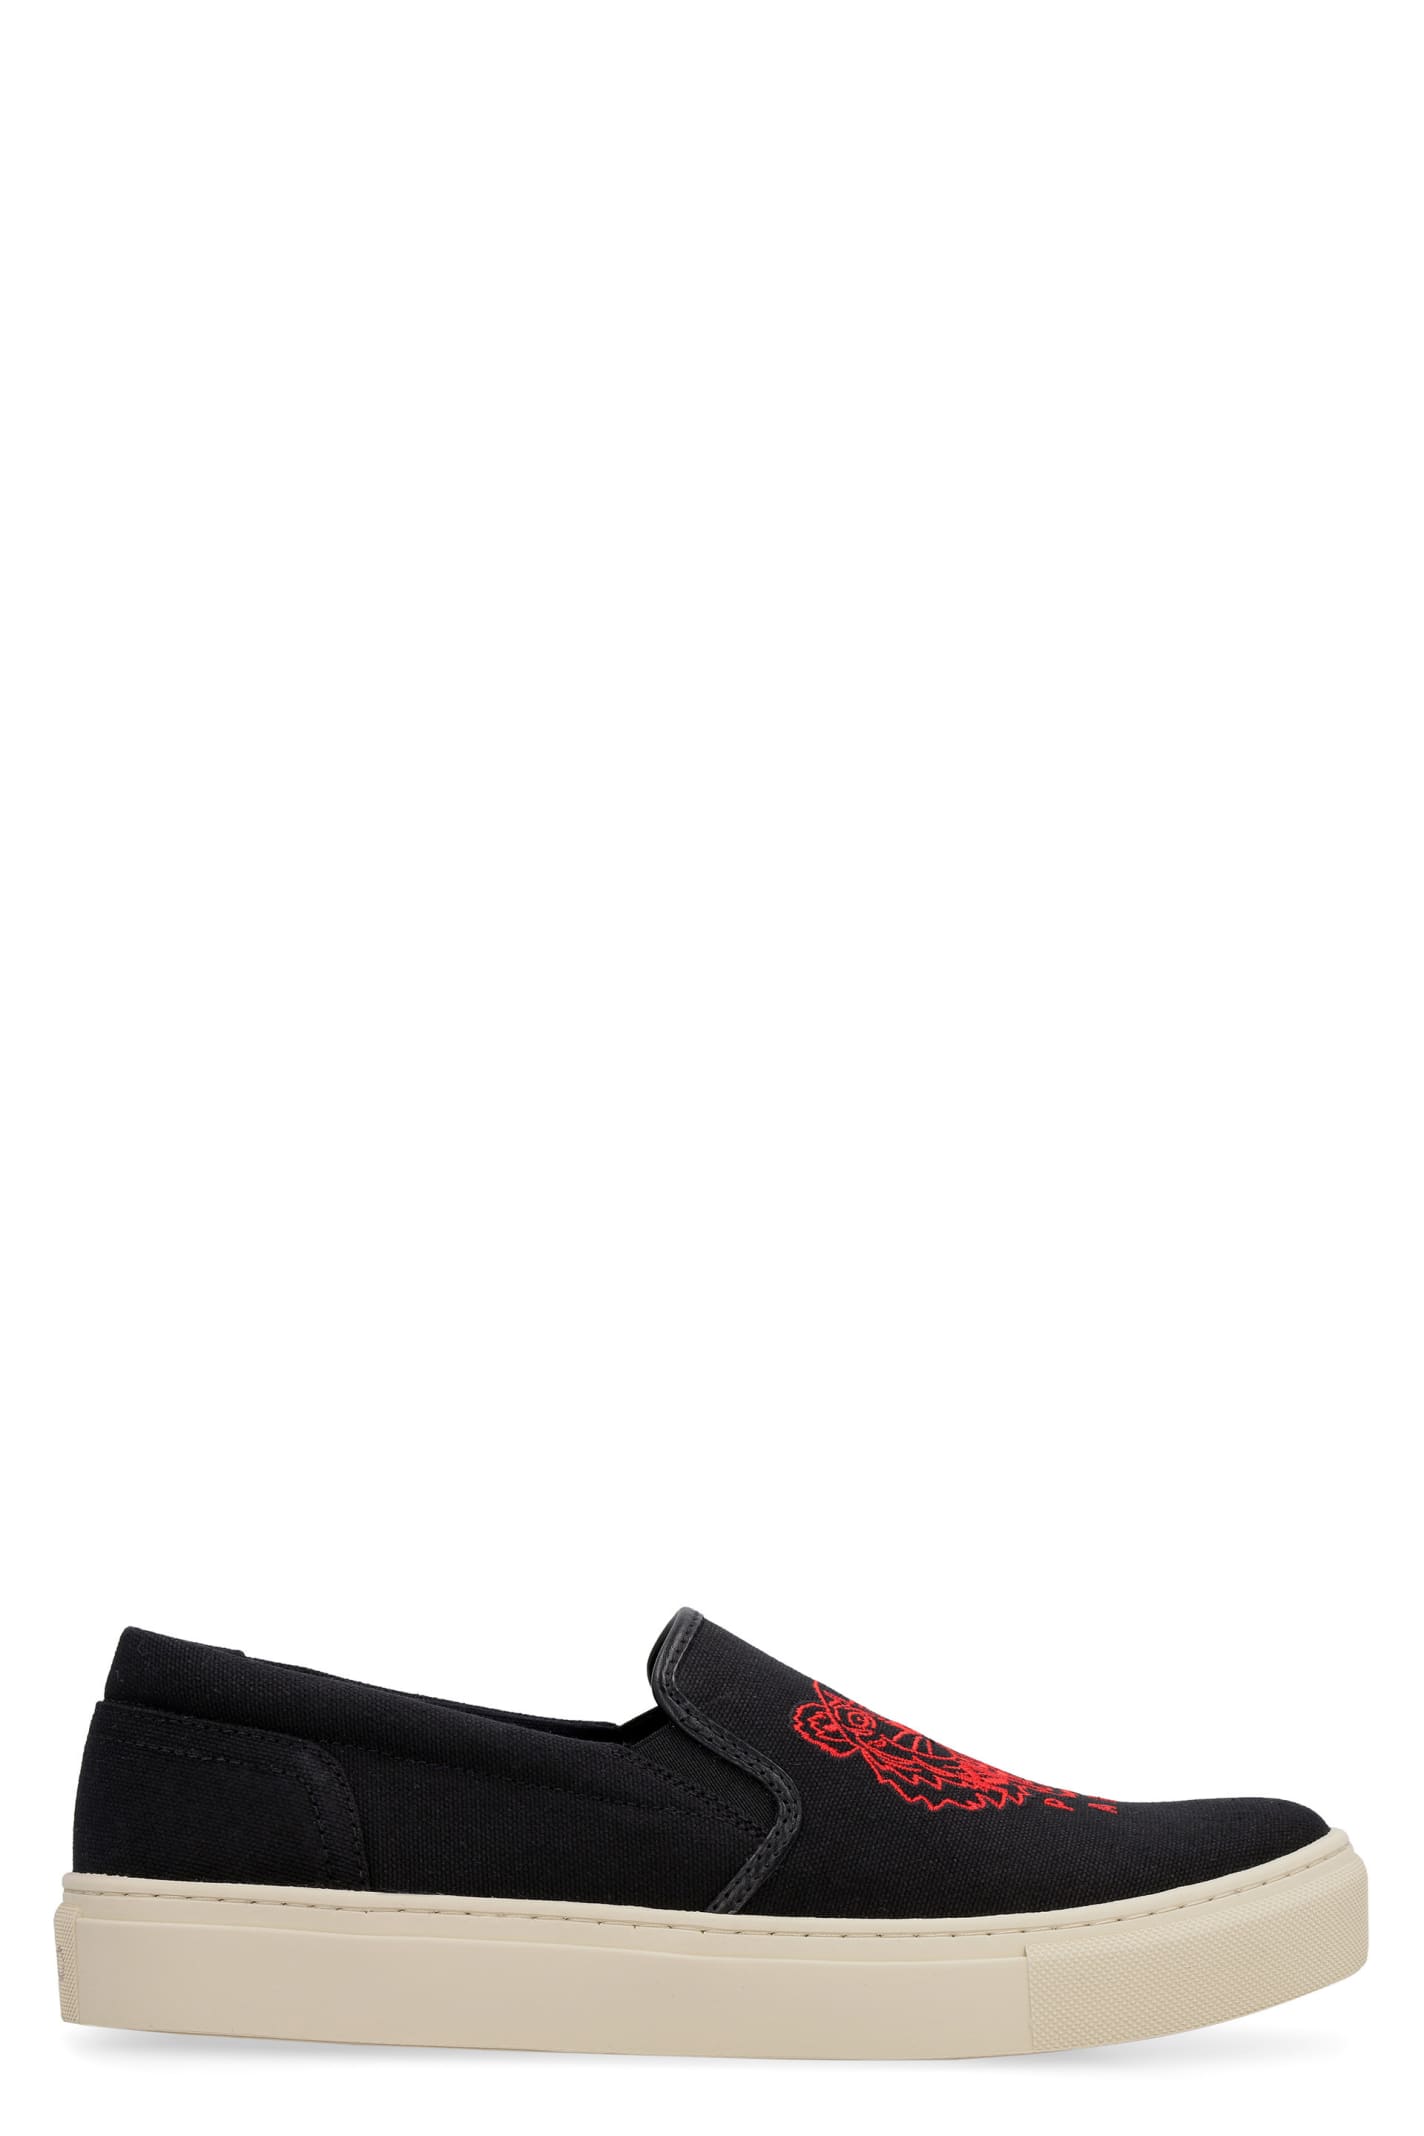 Buy Kenzo Canvas Slip-on Sneakers online, shop Kenzo shoes with free shipping